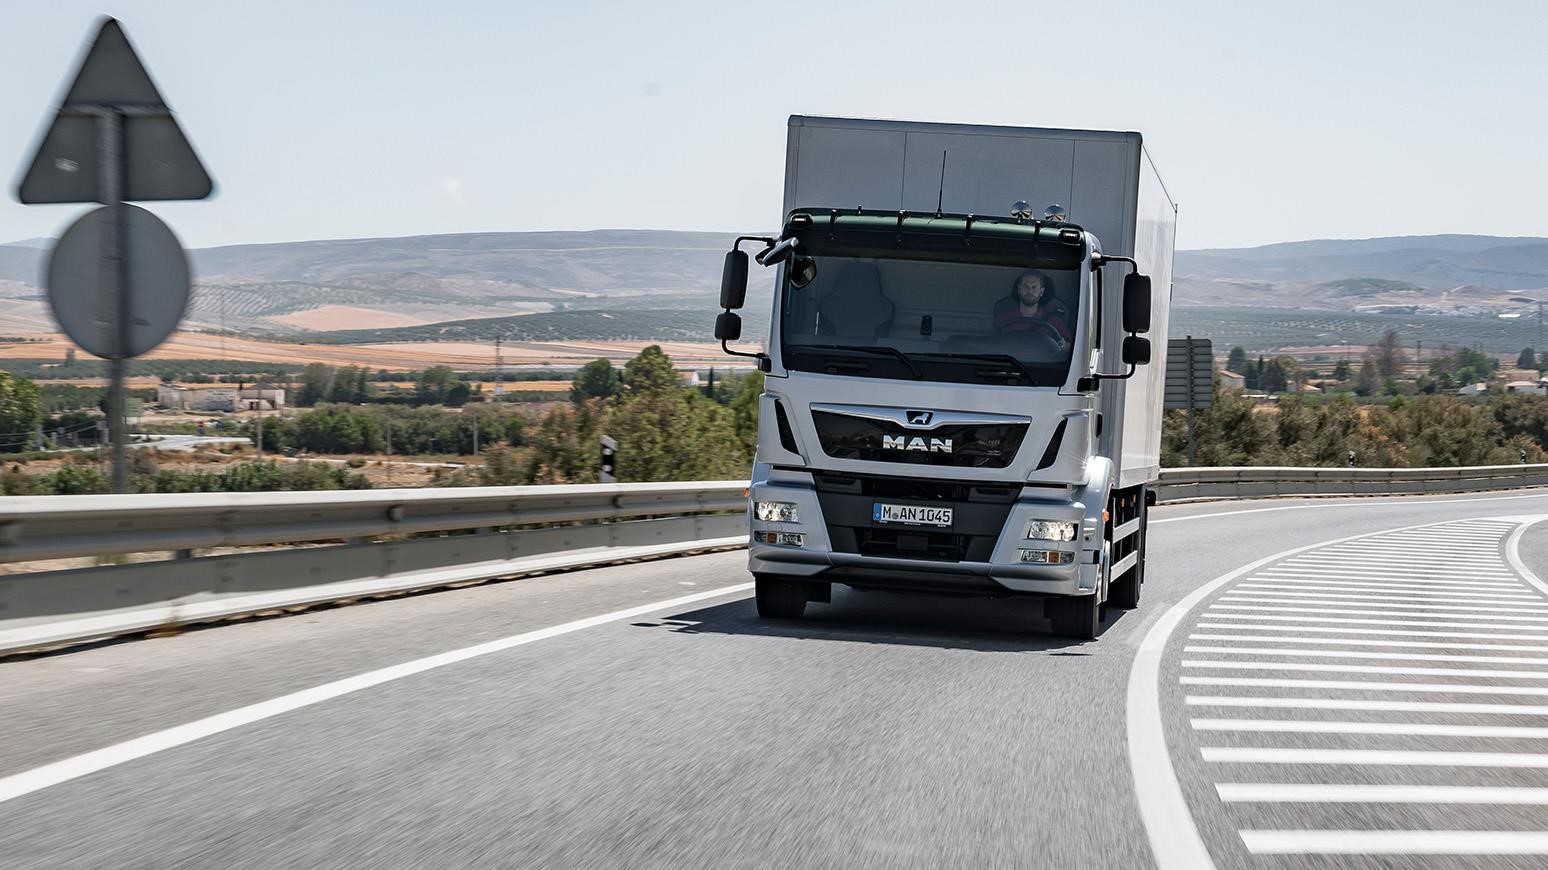 From Local Jobs To Long-Haul Transport, The MAN TGM Offers Wide Range Of Uses